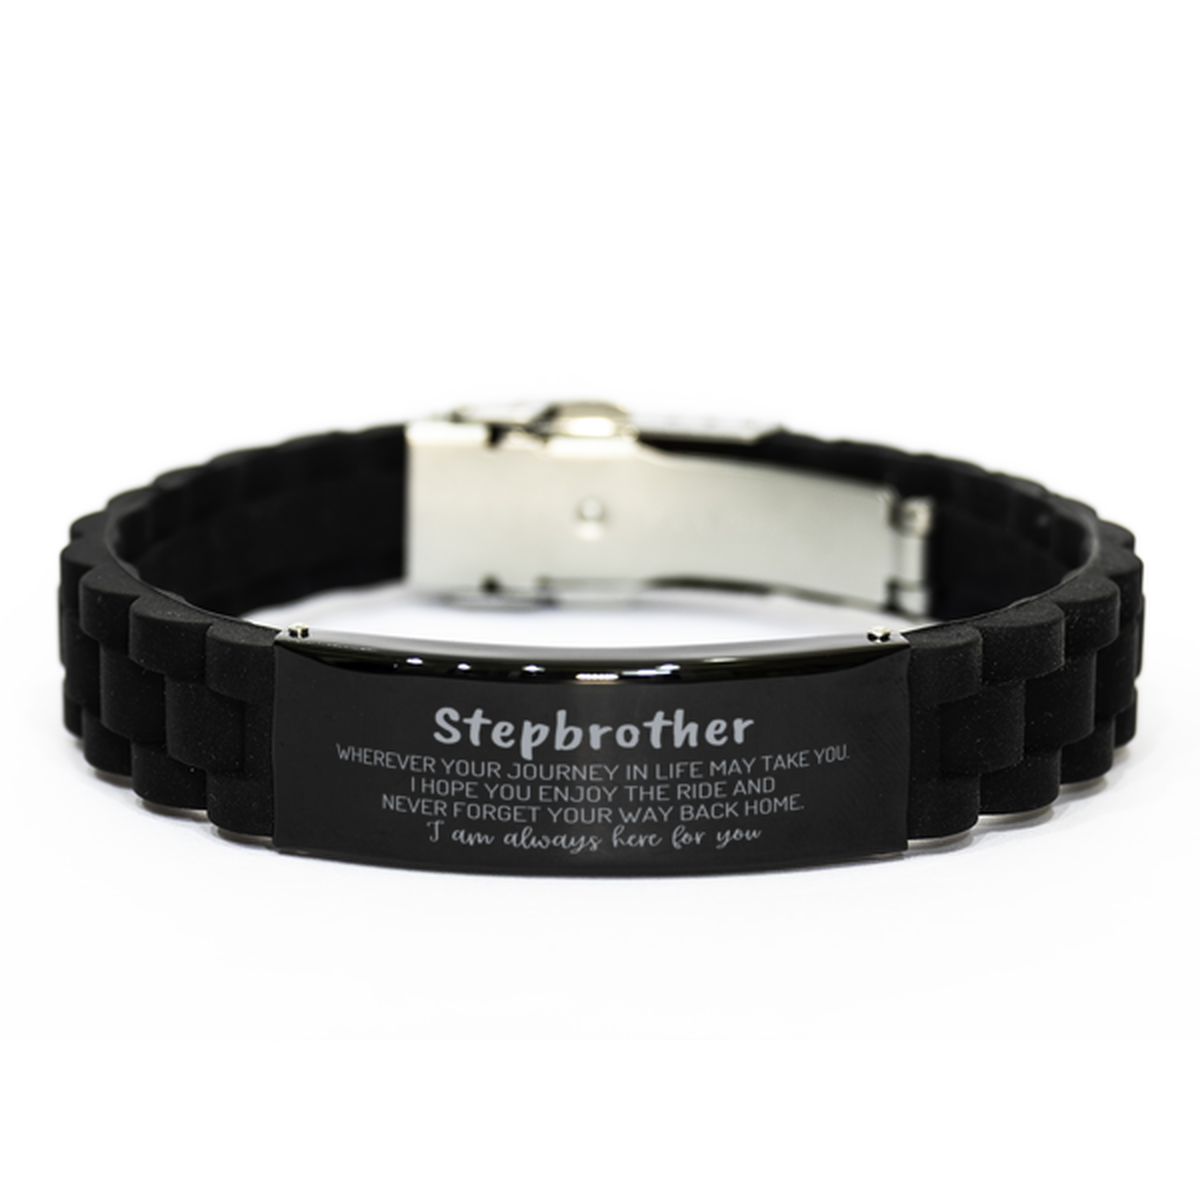 Stepbrother wherever your journey in life may take you, I am always here for you Stepbrother Black Glidelock Clasp Bracelet, Awesome Christmas Gifts For Stepbrother, Stepbrother Birthday Gifts for Men Women Family Loved One